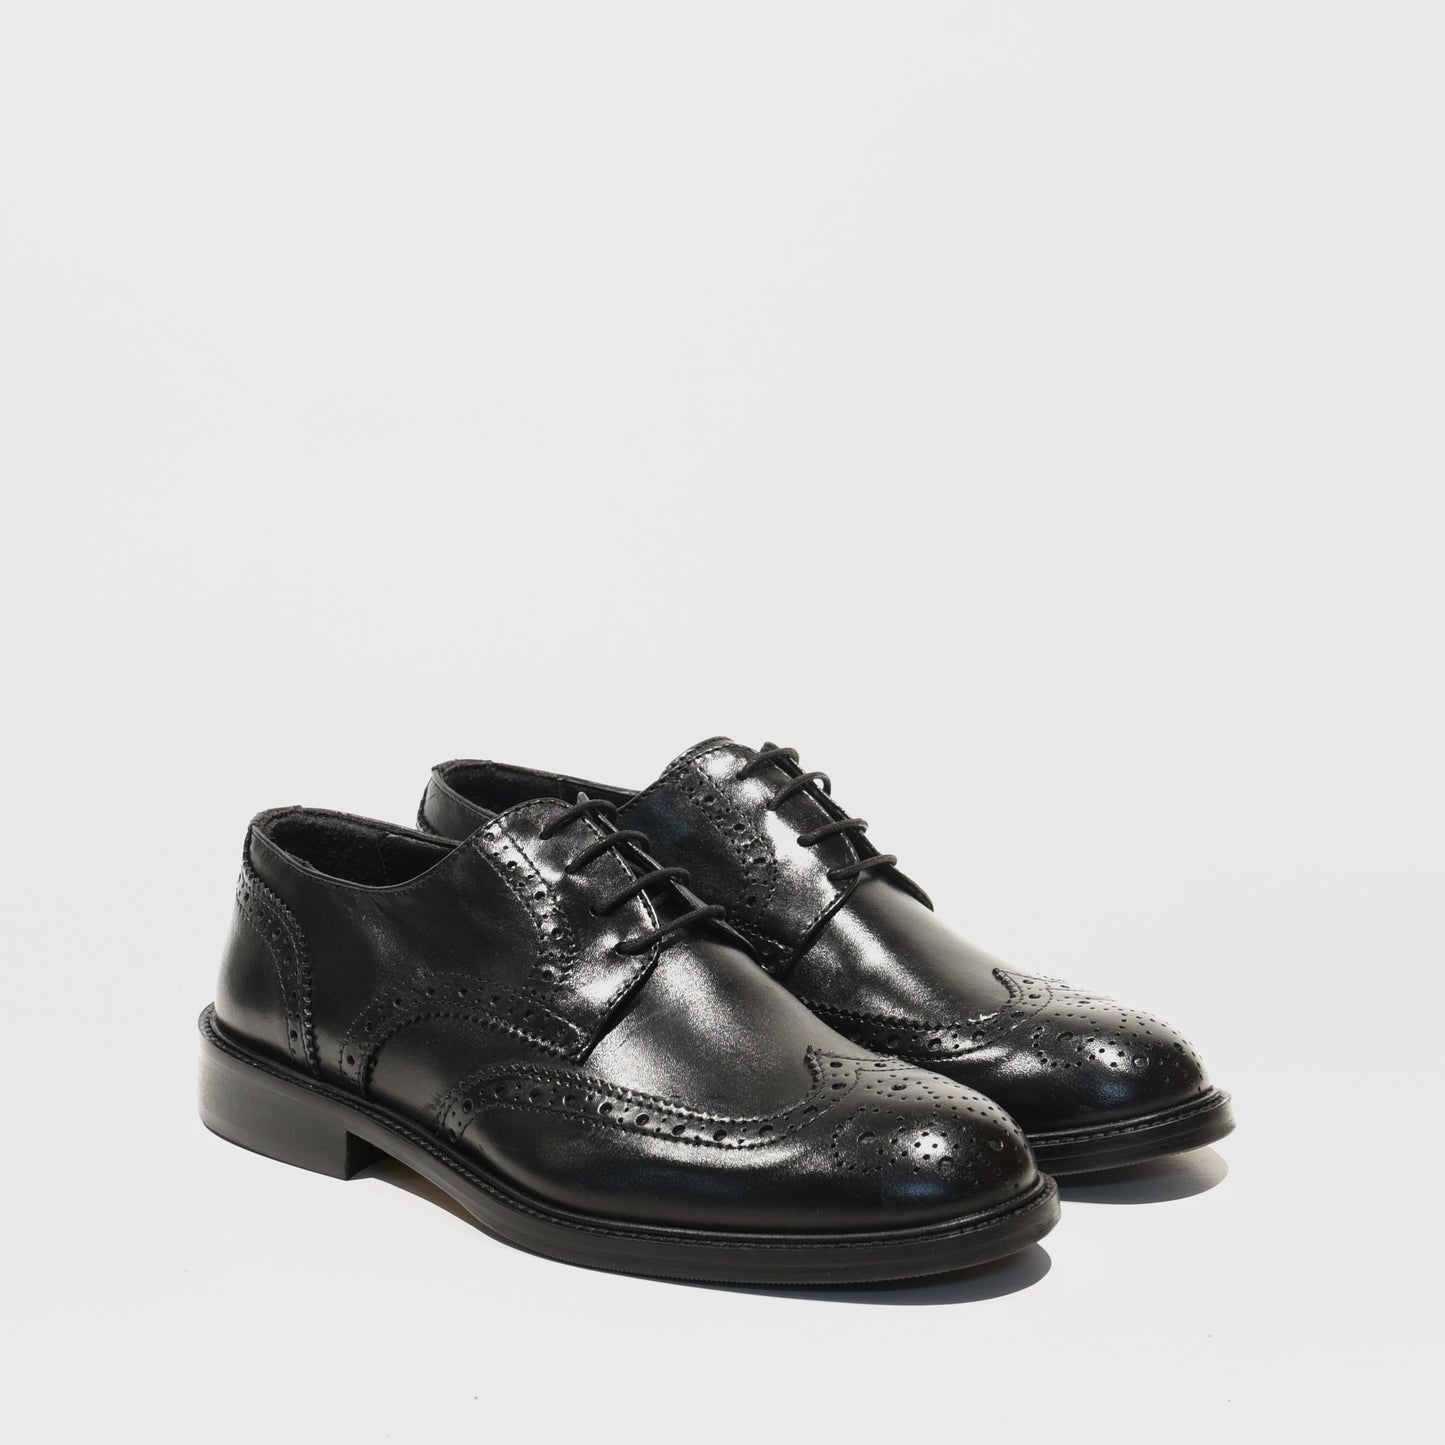 Shalapi Italian classic oxford shoes for men in Black